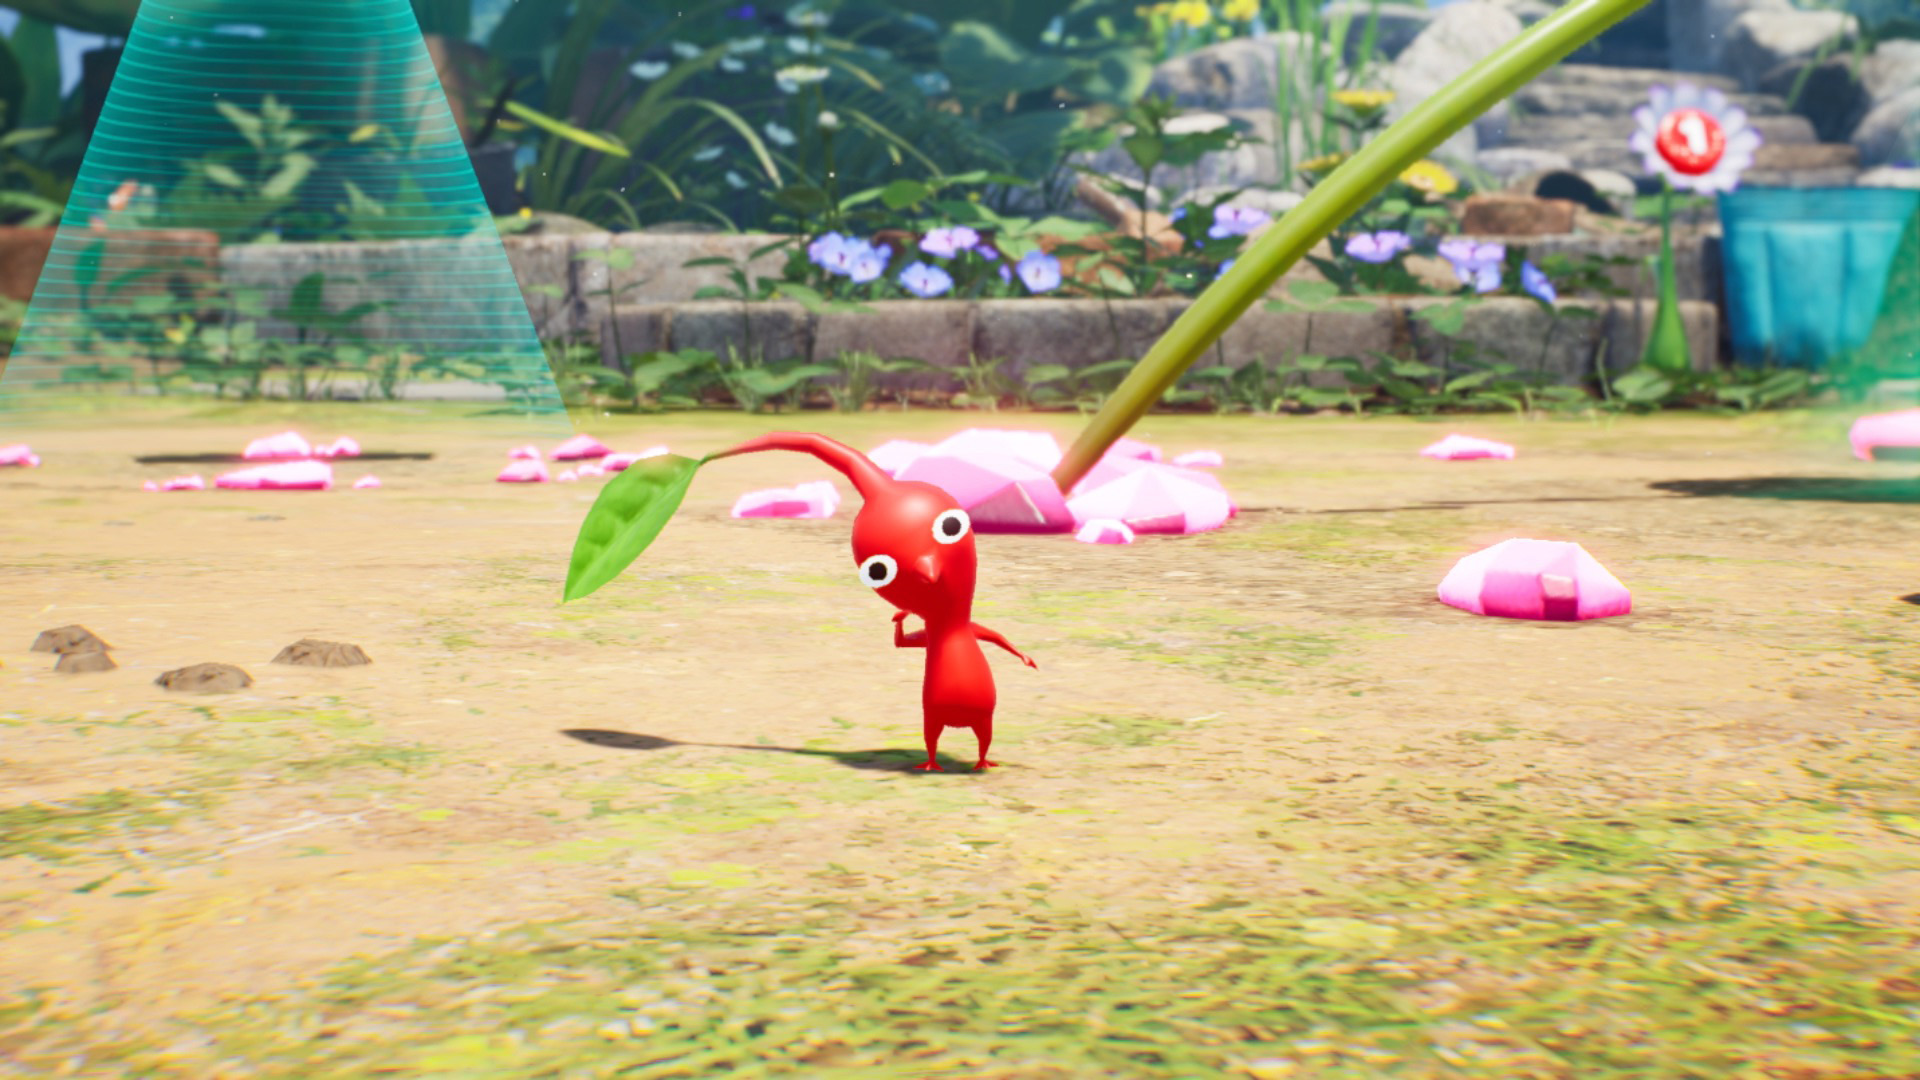 Pikmin 4 is a fantastic, laid-back game everyone should experience